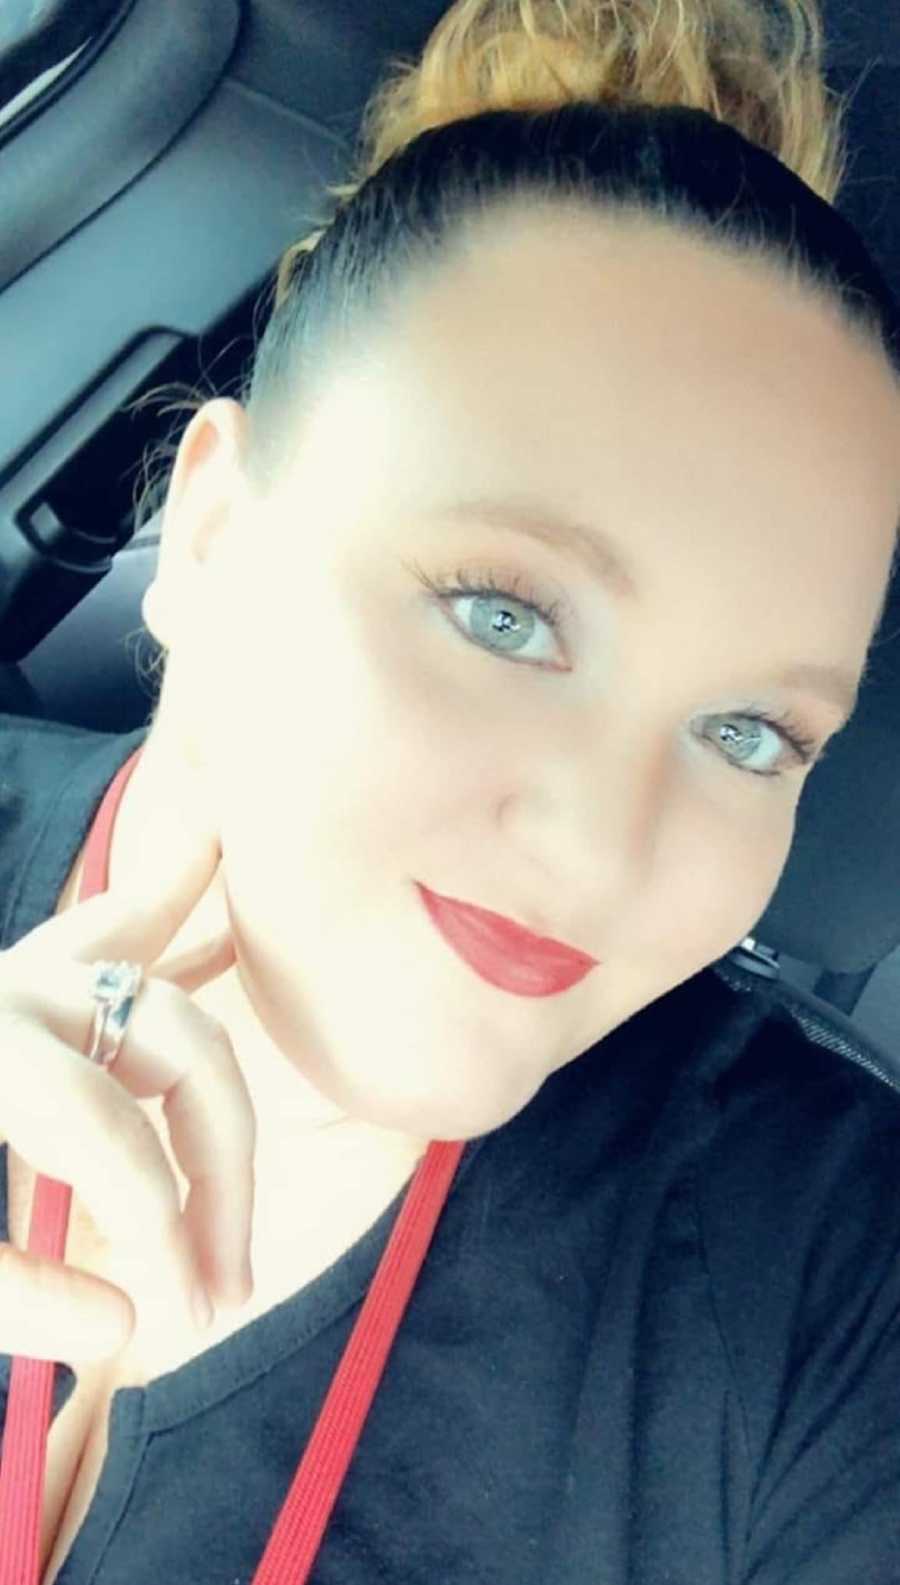 Woman who was sexually abused by her father as a child smiles as she takes selfie in car